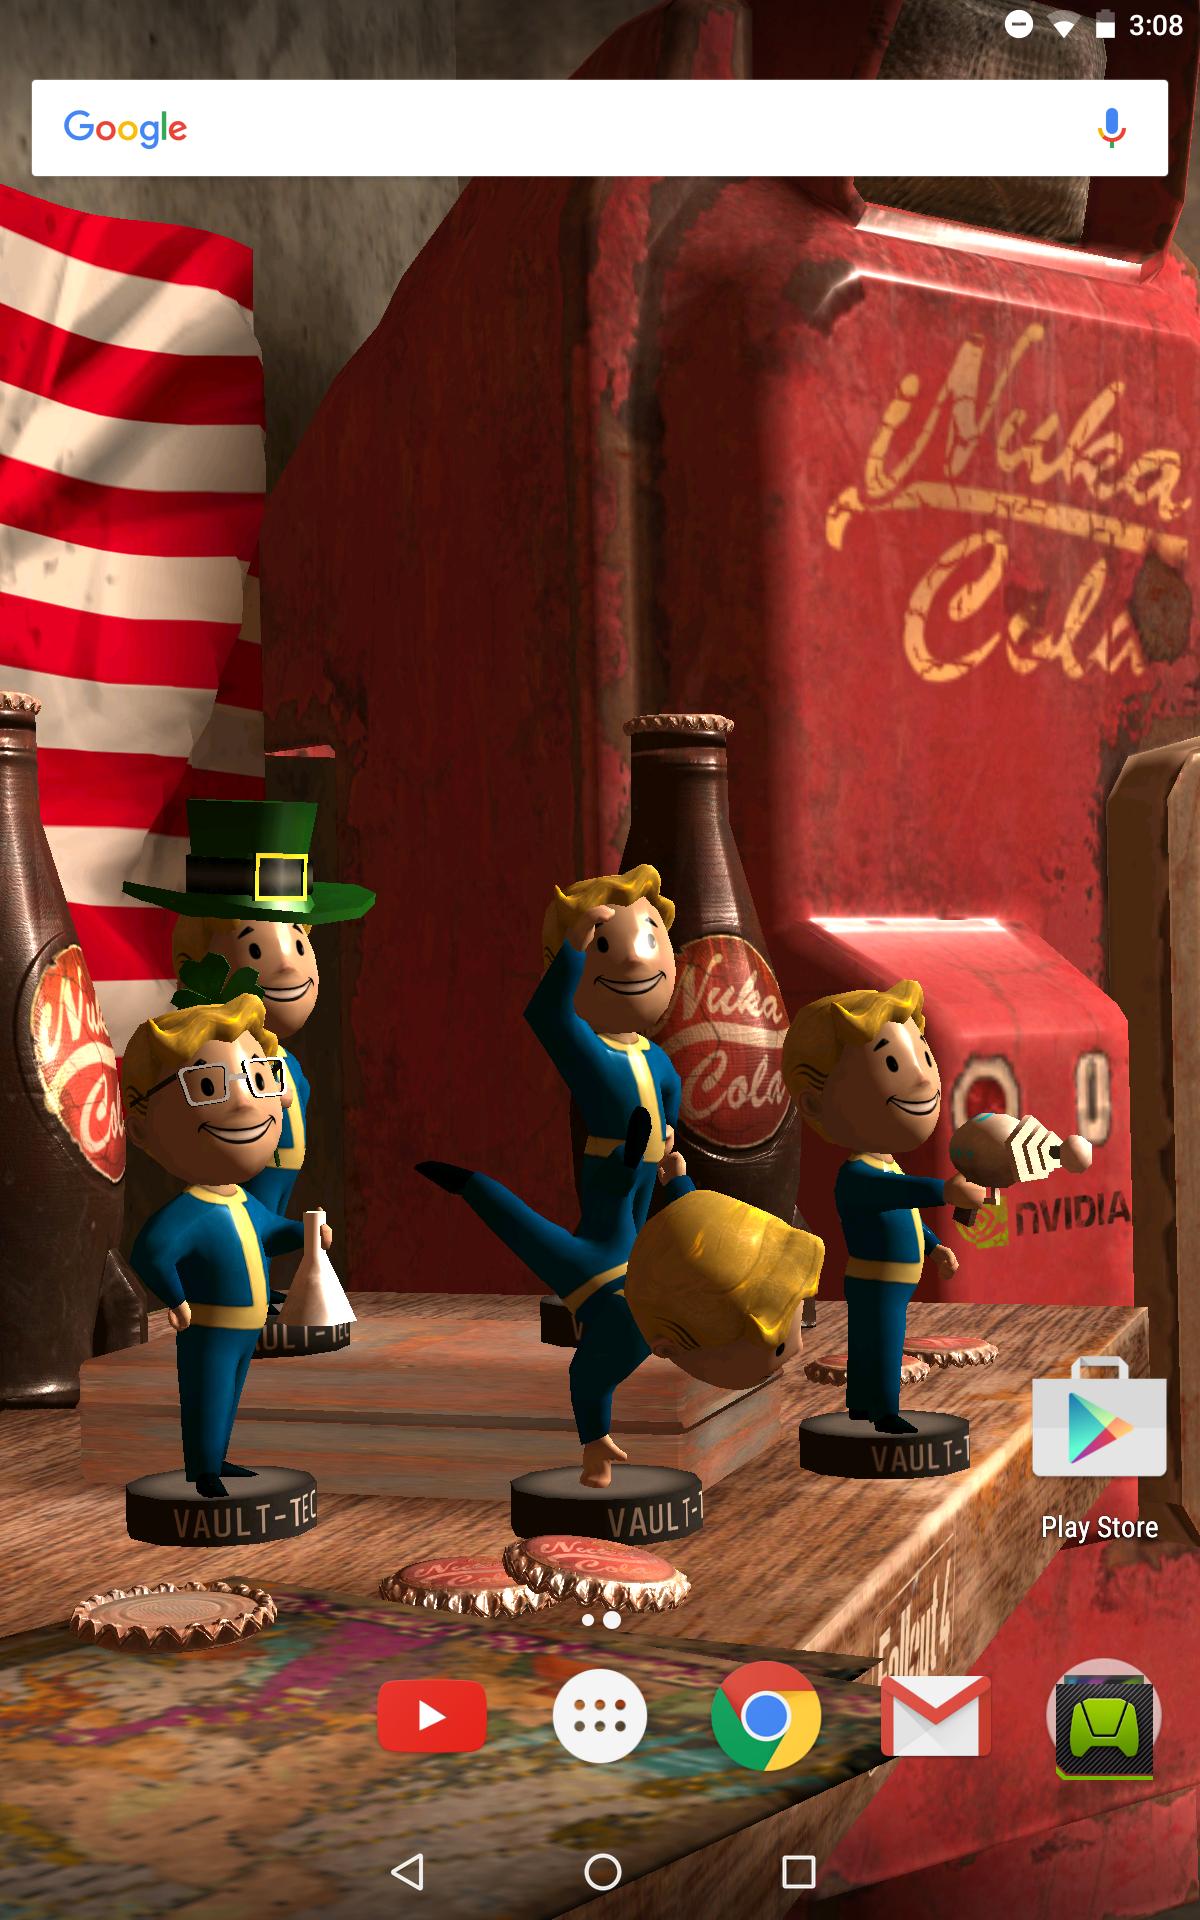 Fallout 4 Live Wallpaper For Android Apk Download